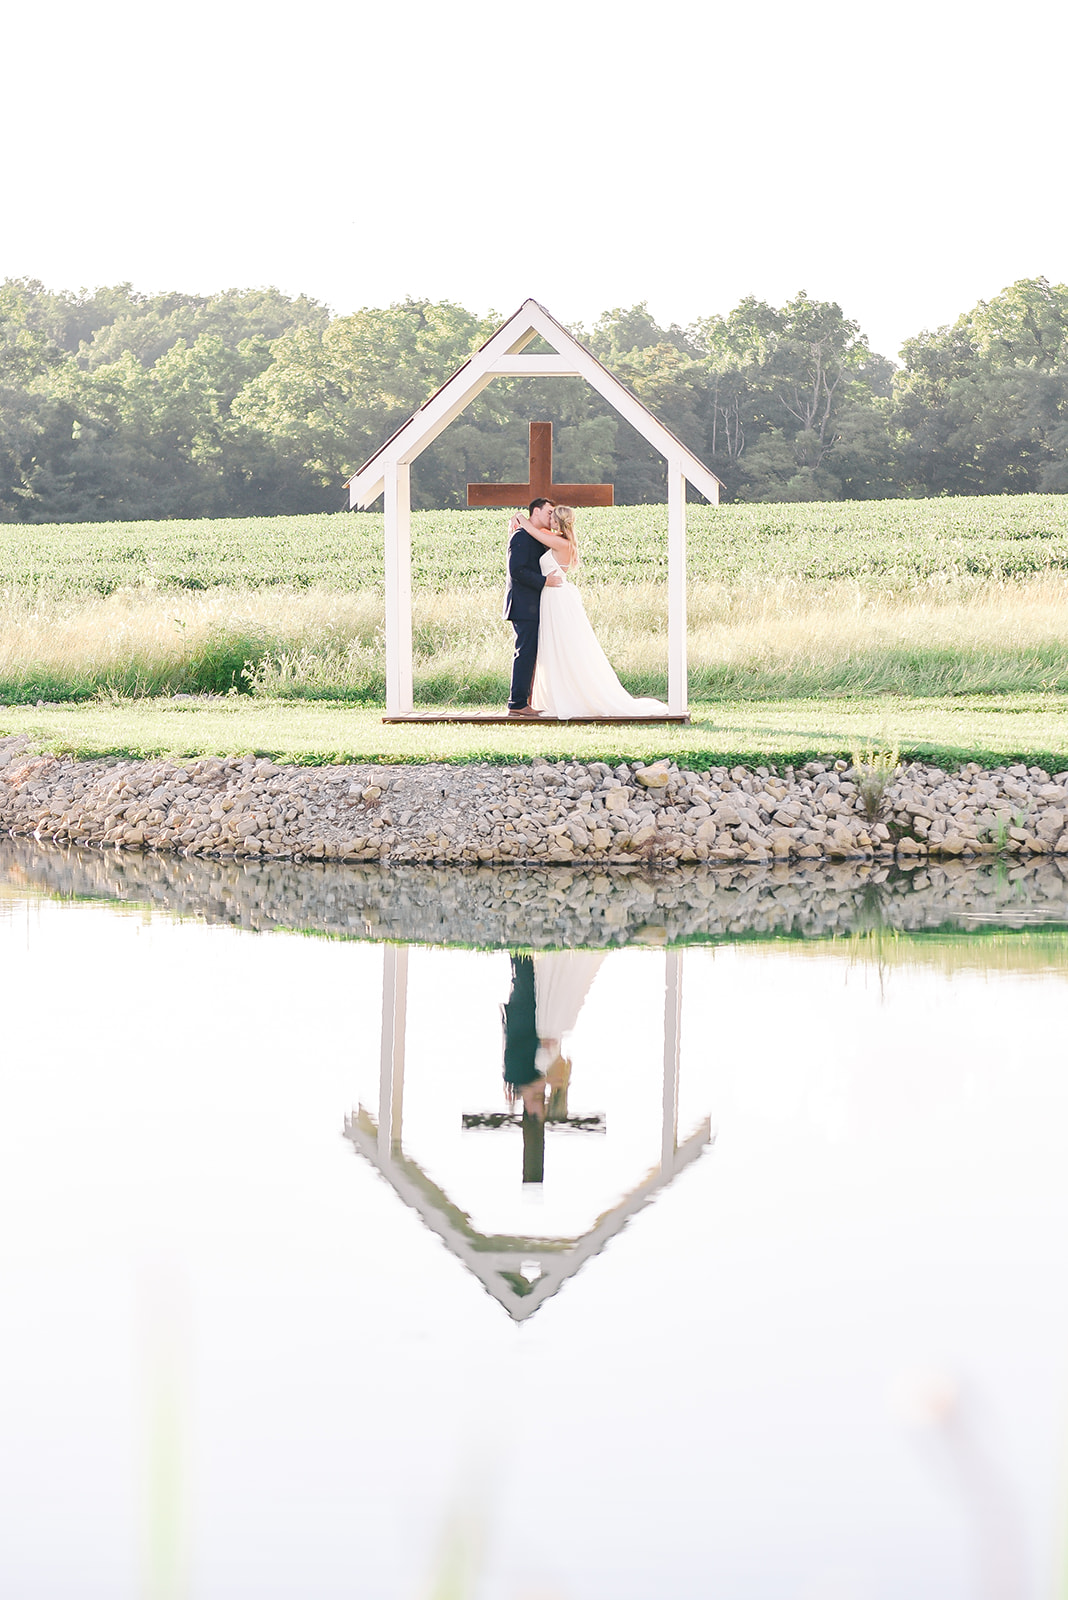 A bride and groom kiss beneath a cross arbor as their reflection glistens on the lake at their wedding venue.